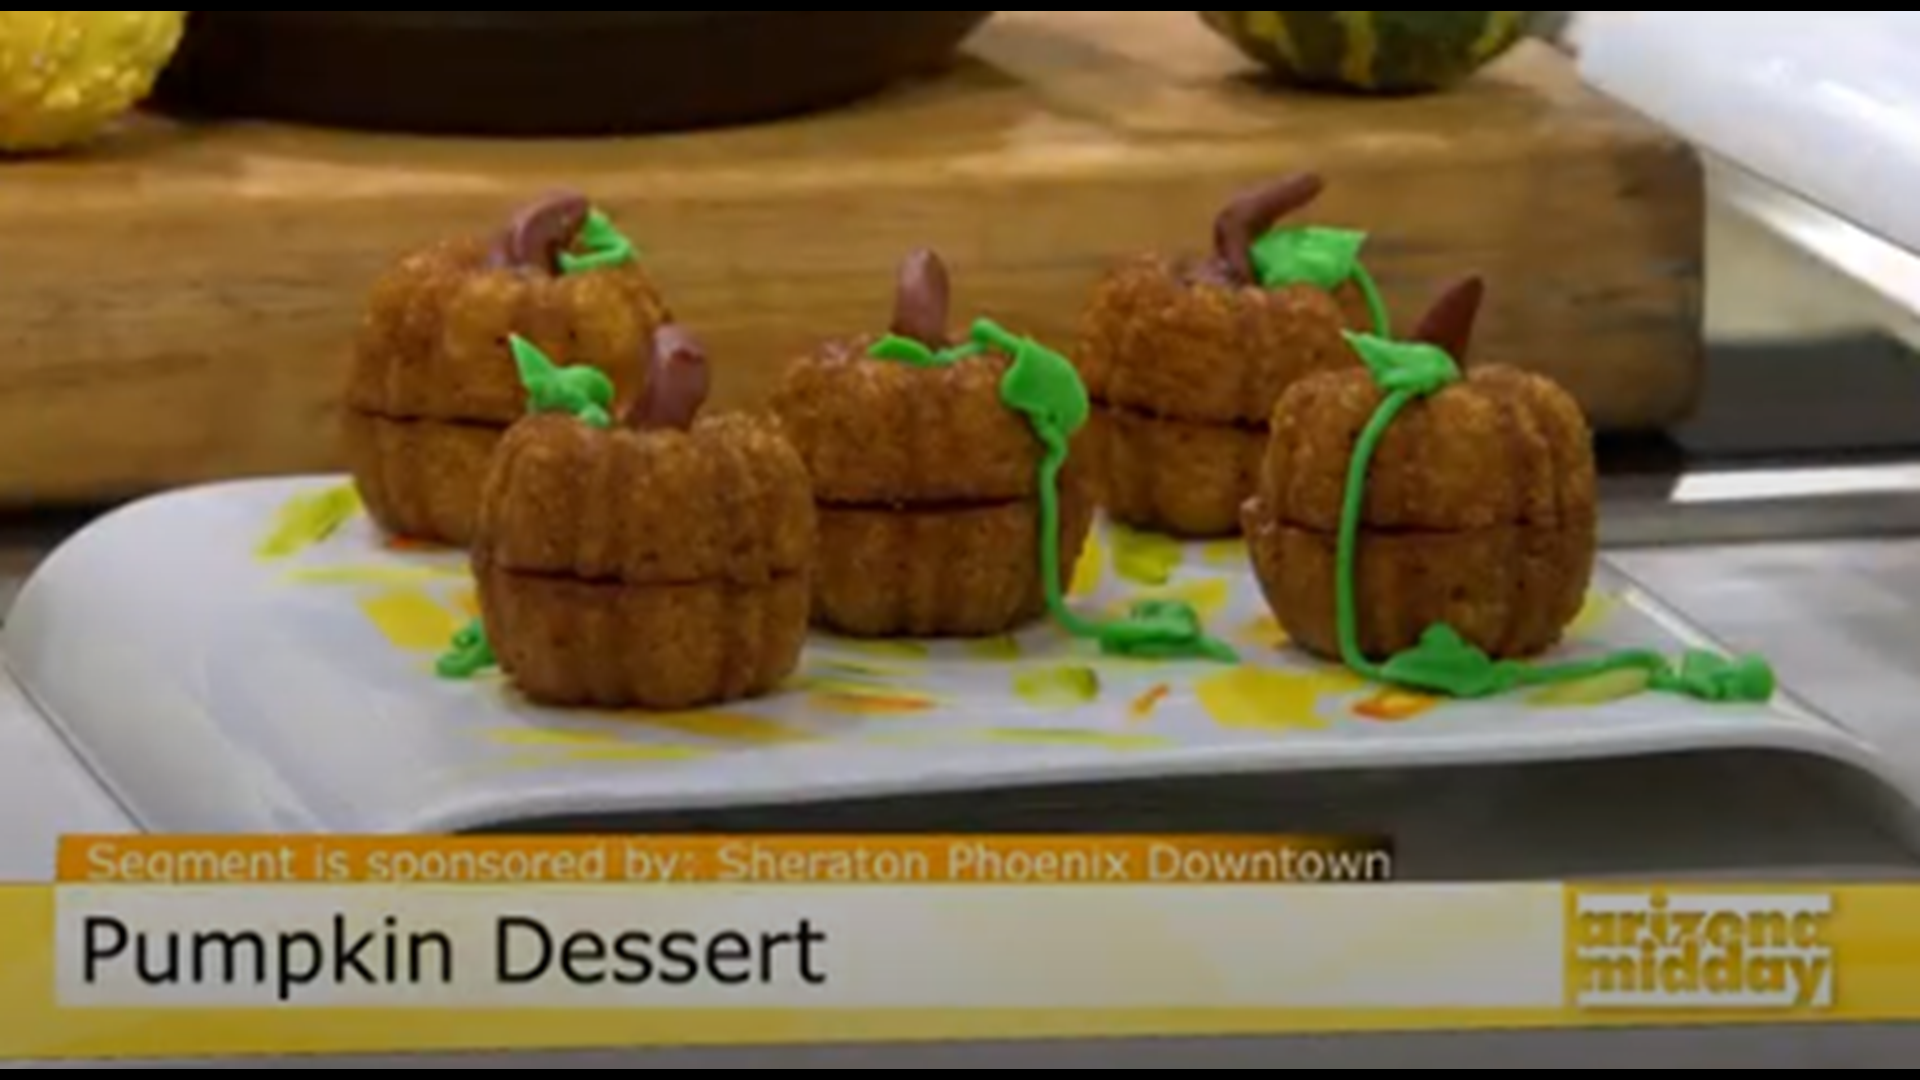 Jolie Skwiercz, Pastry Chef from the Sheraton Phoenix Downtown shows us how we can fill our bellies this fall with 3 delicious pumpkin dessert recipes!